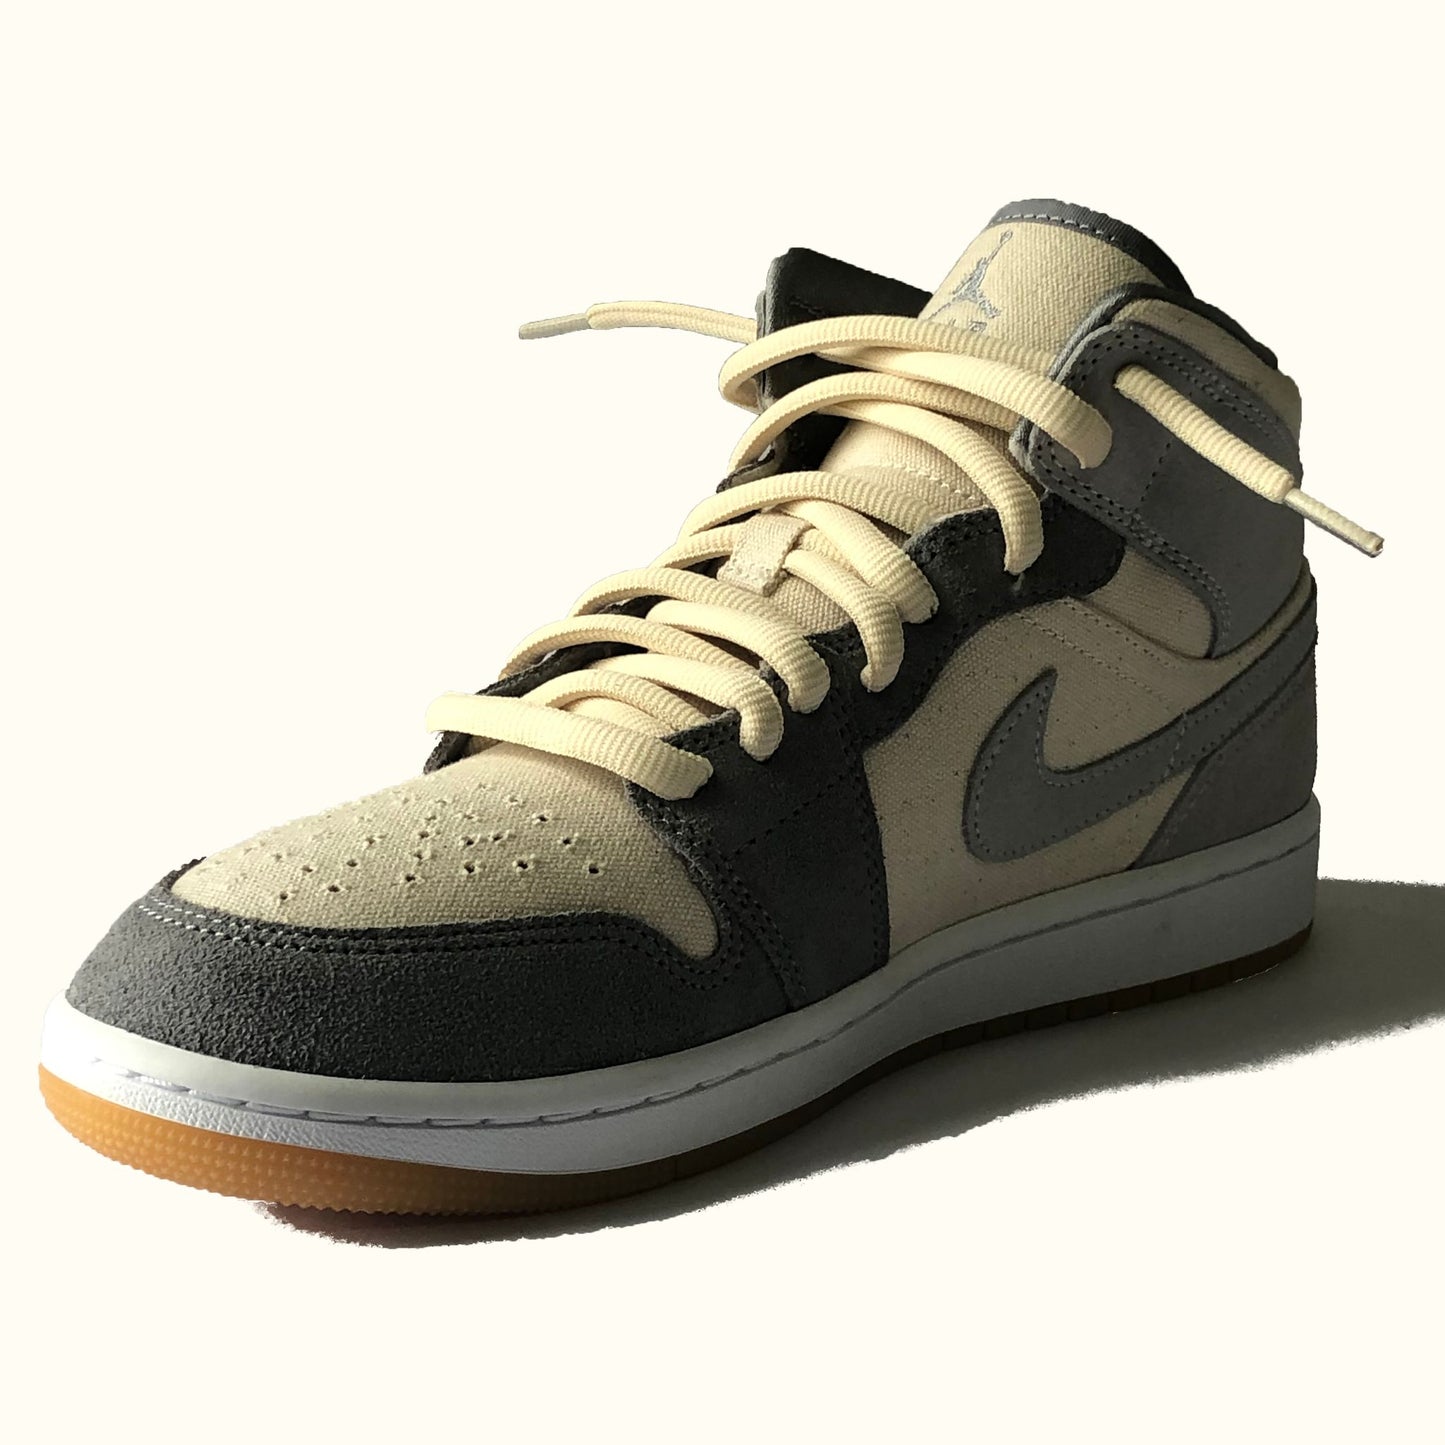 Cream | SB Dunks Inspired Oval laces